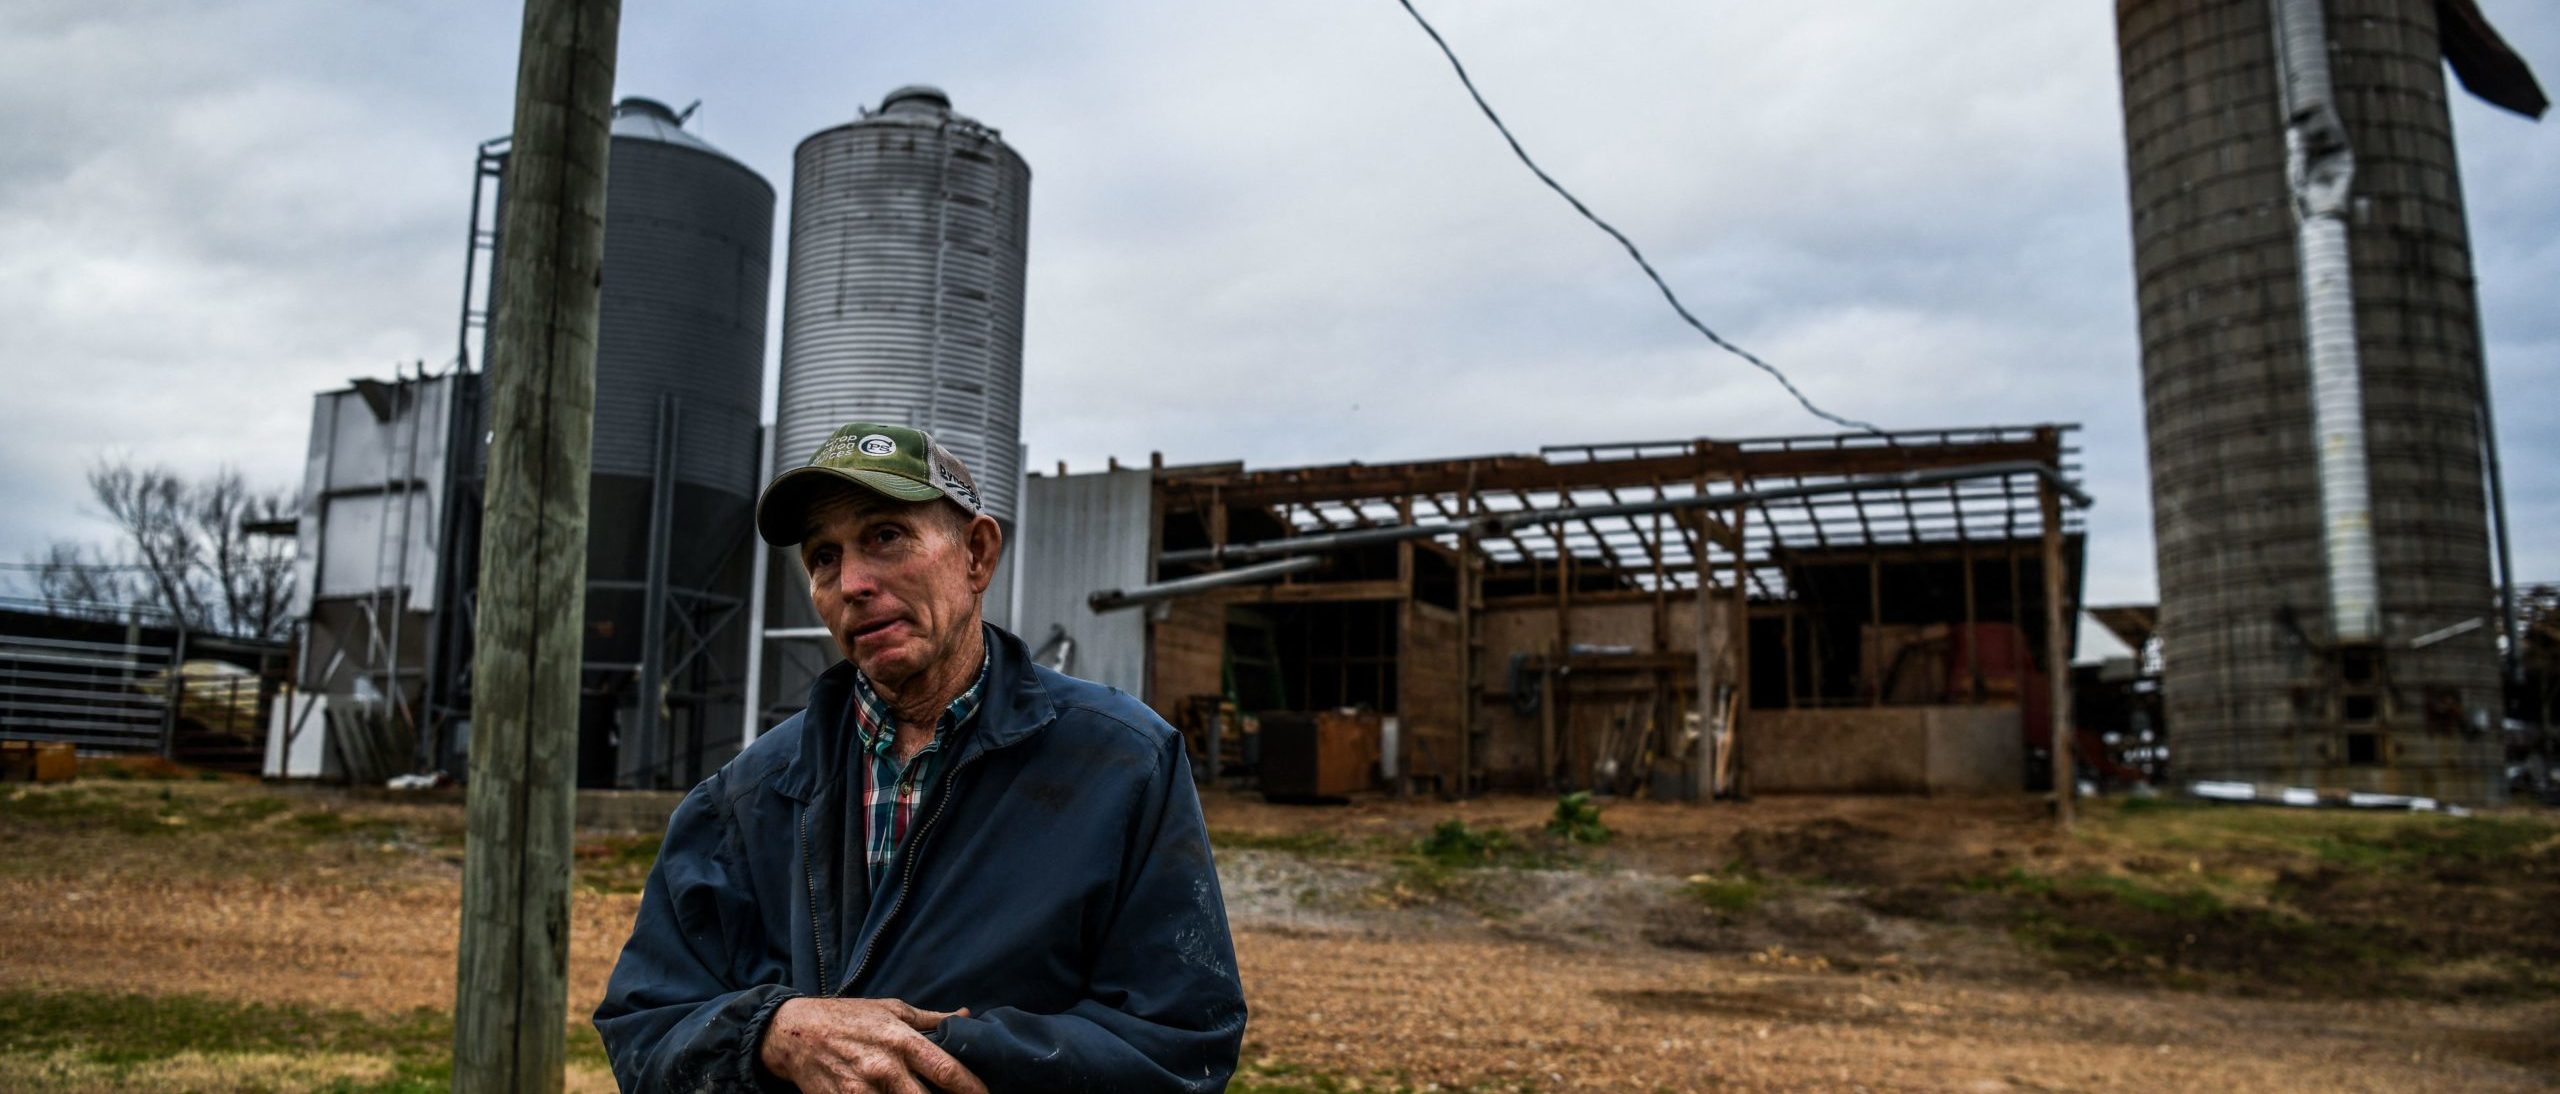 Clifford Humphreys, Jr stands outside his damaged barn in Fulgham, Kentucky, on December 15, 2021, five days after tornadoes hit the area. - Even as donations of food, blankets and clothing made their way to isolated spots, some tornado-hit rural Kentuckians -- many of whom embrace a lifestyle of self-sufficiency and independence -- said they had no interest in being bombarded with help from Washington. "Personally the less government I see the better," said Clifford Humphreys, a 65-year-old whose farm on a back road in Fulgham suffered moderate damage. (Photo by CHANDAN KHANNA / AFP) (Photo by CHANDAN KHANNA/AFP via Getty Images)